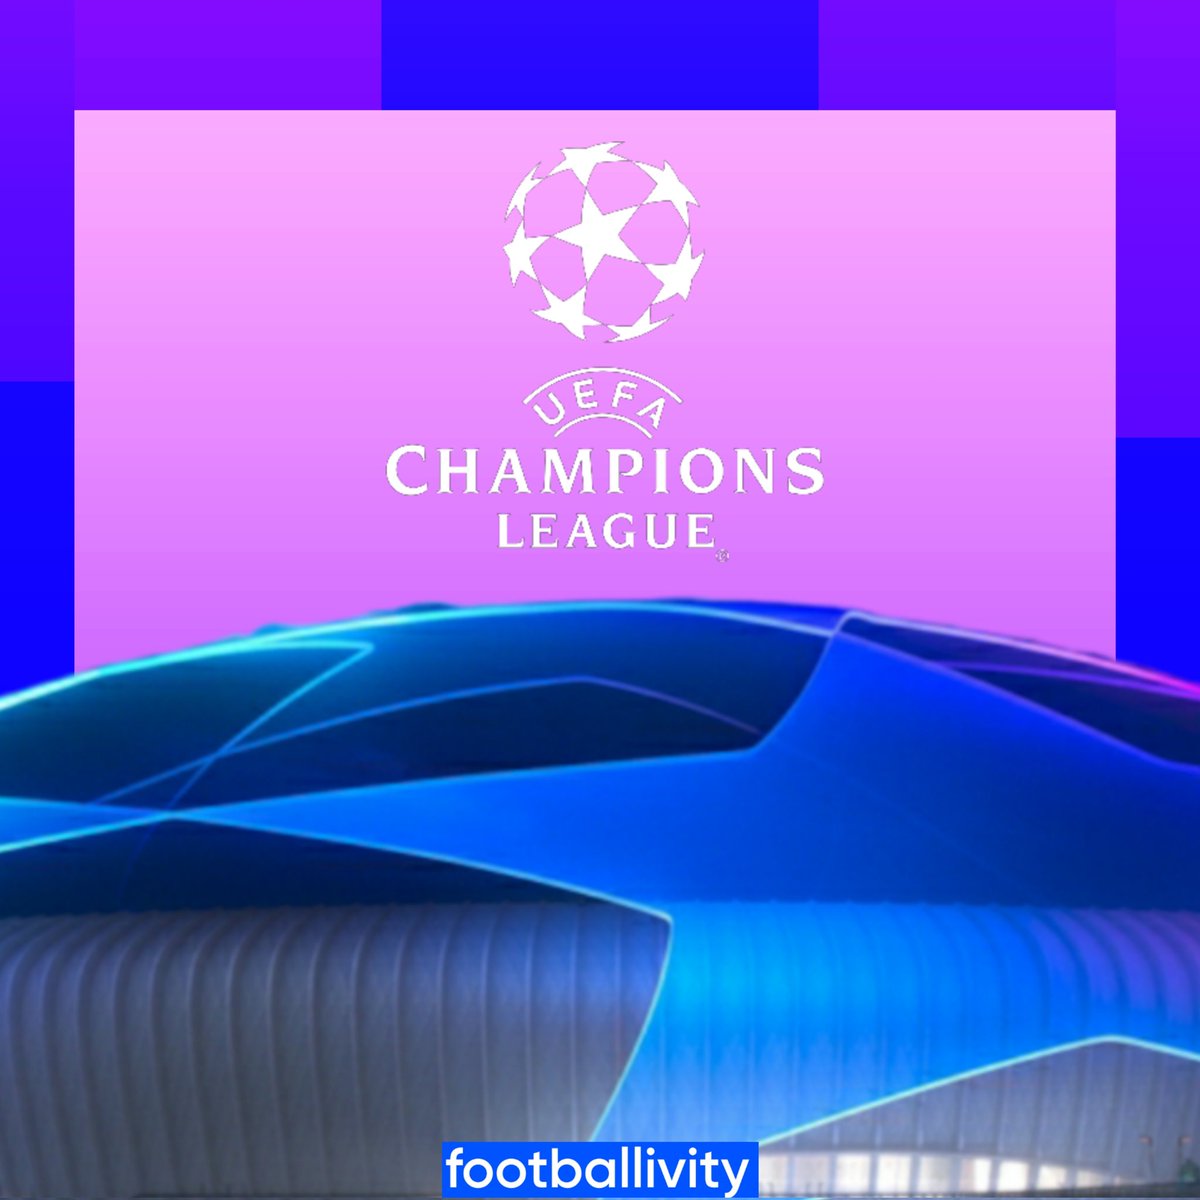 THE CHAMPIONS! ⚽⭐ The remaining group stage matches of #ChampionsLeague is here! Join our discord to chat about #UCL: discord.gg/Fr3jR353Jb #NEWPSG | #DORMIL | #RBLMCI | #ZVEYB | #PORBAR | #CELLAZ | #NEWPAR | #BVBACM | #ZVEYBB | #FCPFCB | #DORACM | #uefachampionsleague